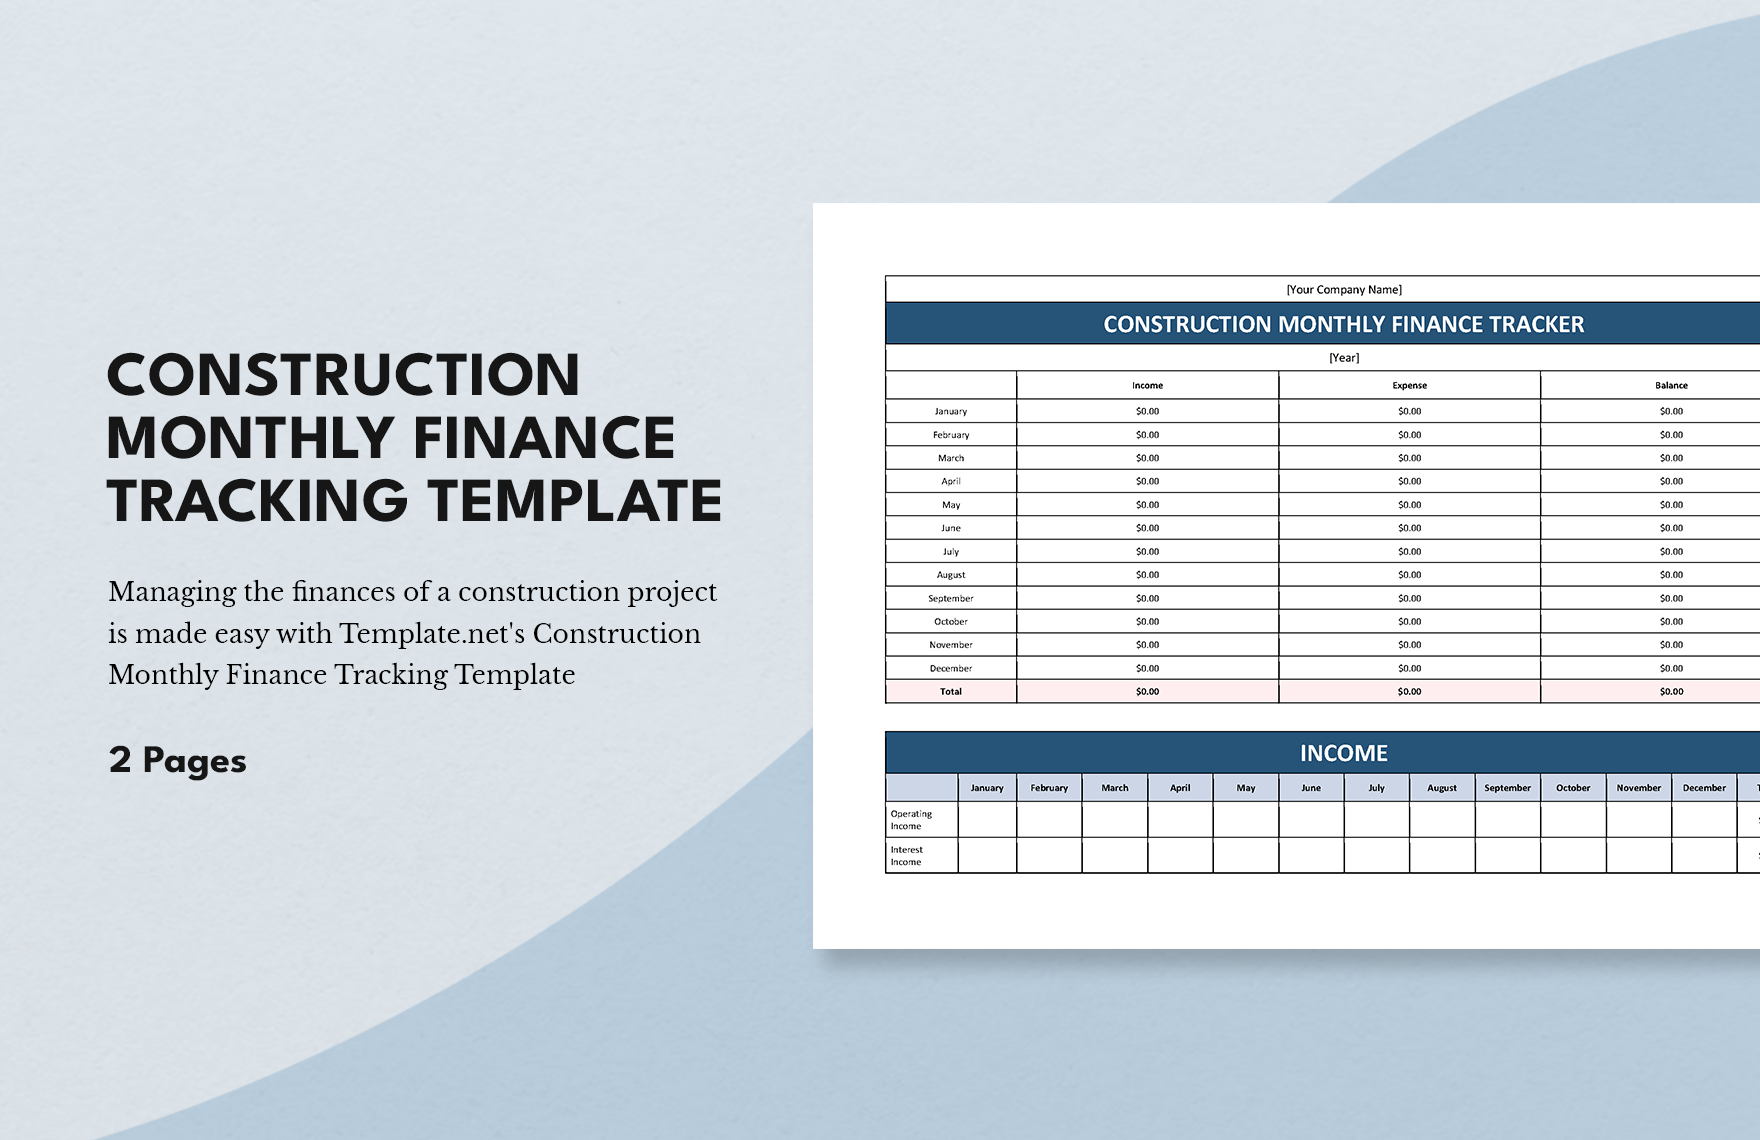 Construction Monthly Finance Tracking Template